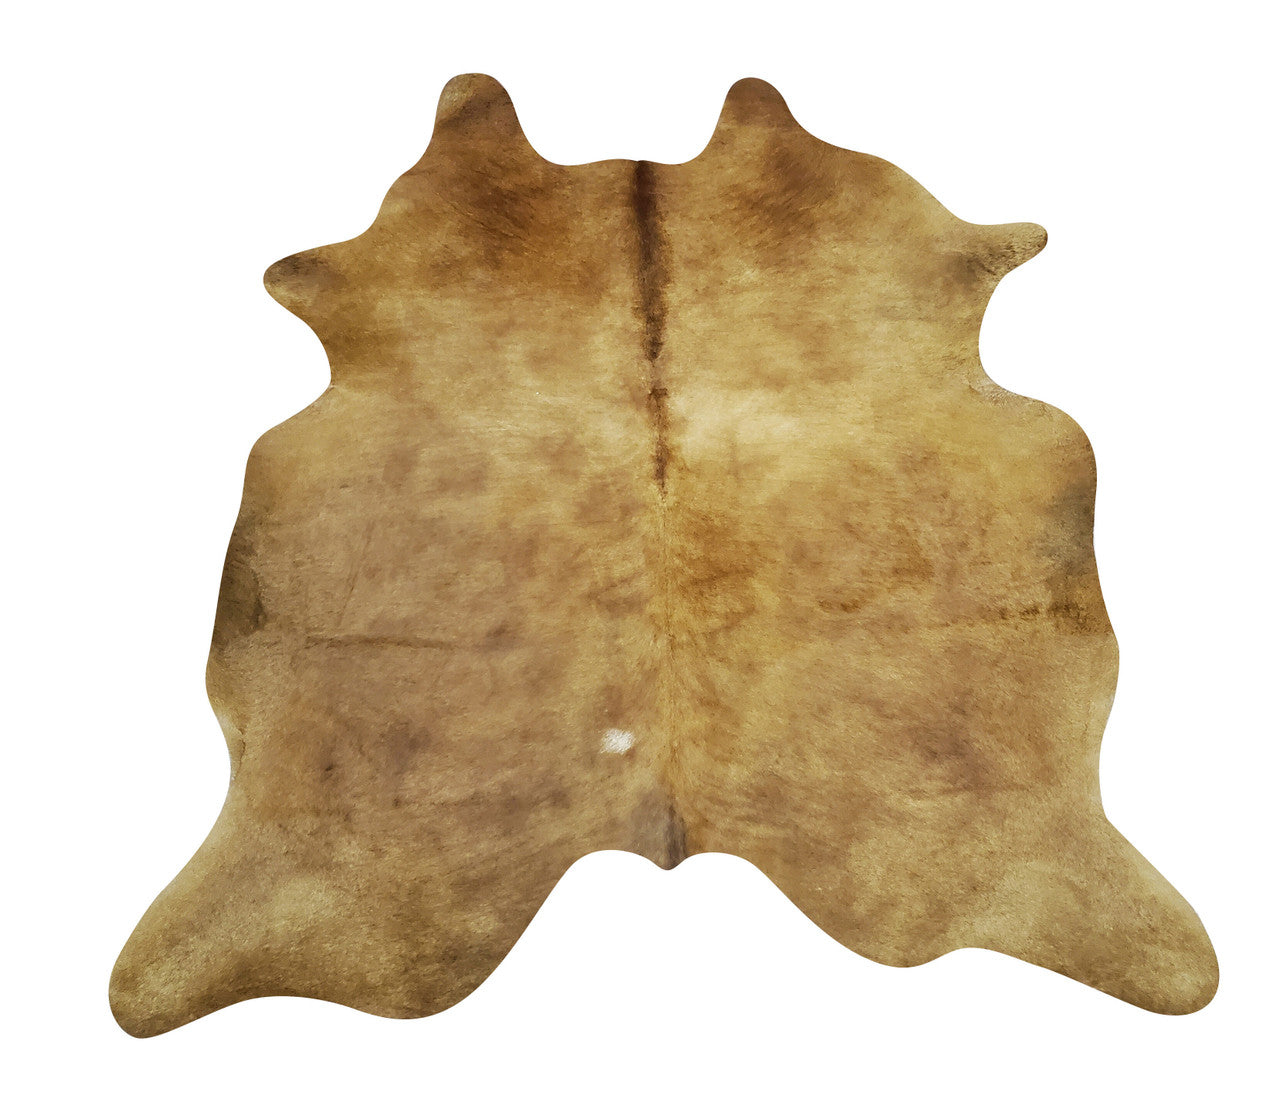 These cowhide rugs are also incredibly durable. They're perfect for high traffic areas, like entryways and living rooms. Plus, they're easy to care for. Just vacuum regularly to remove dust and dirt plus these are the best cow hides Canada.